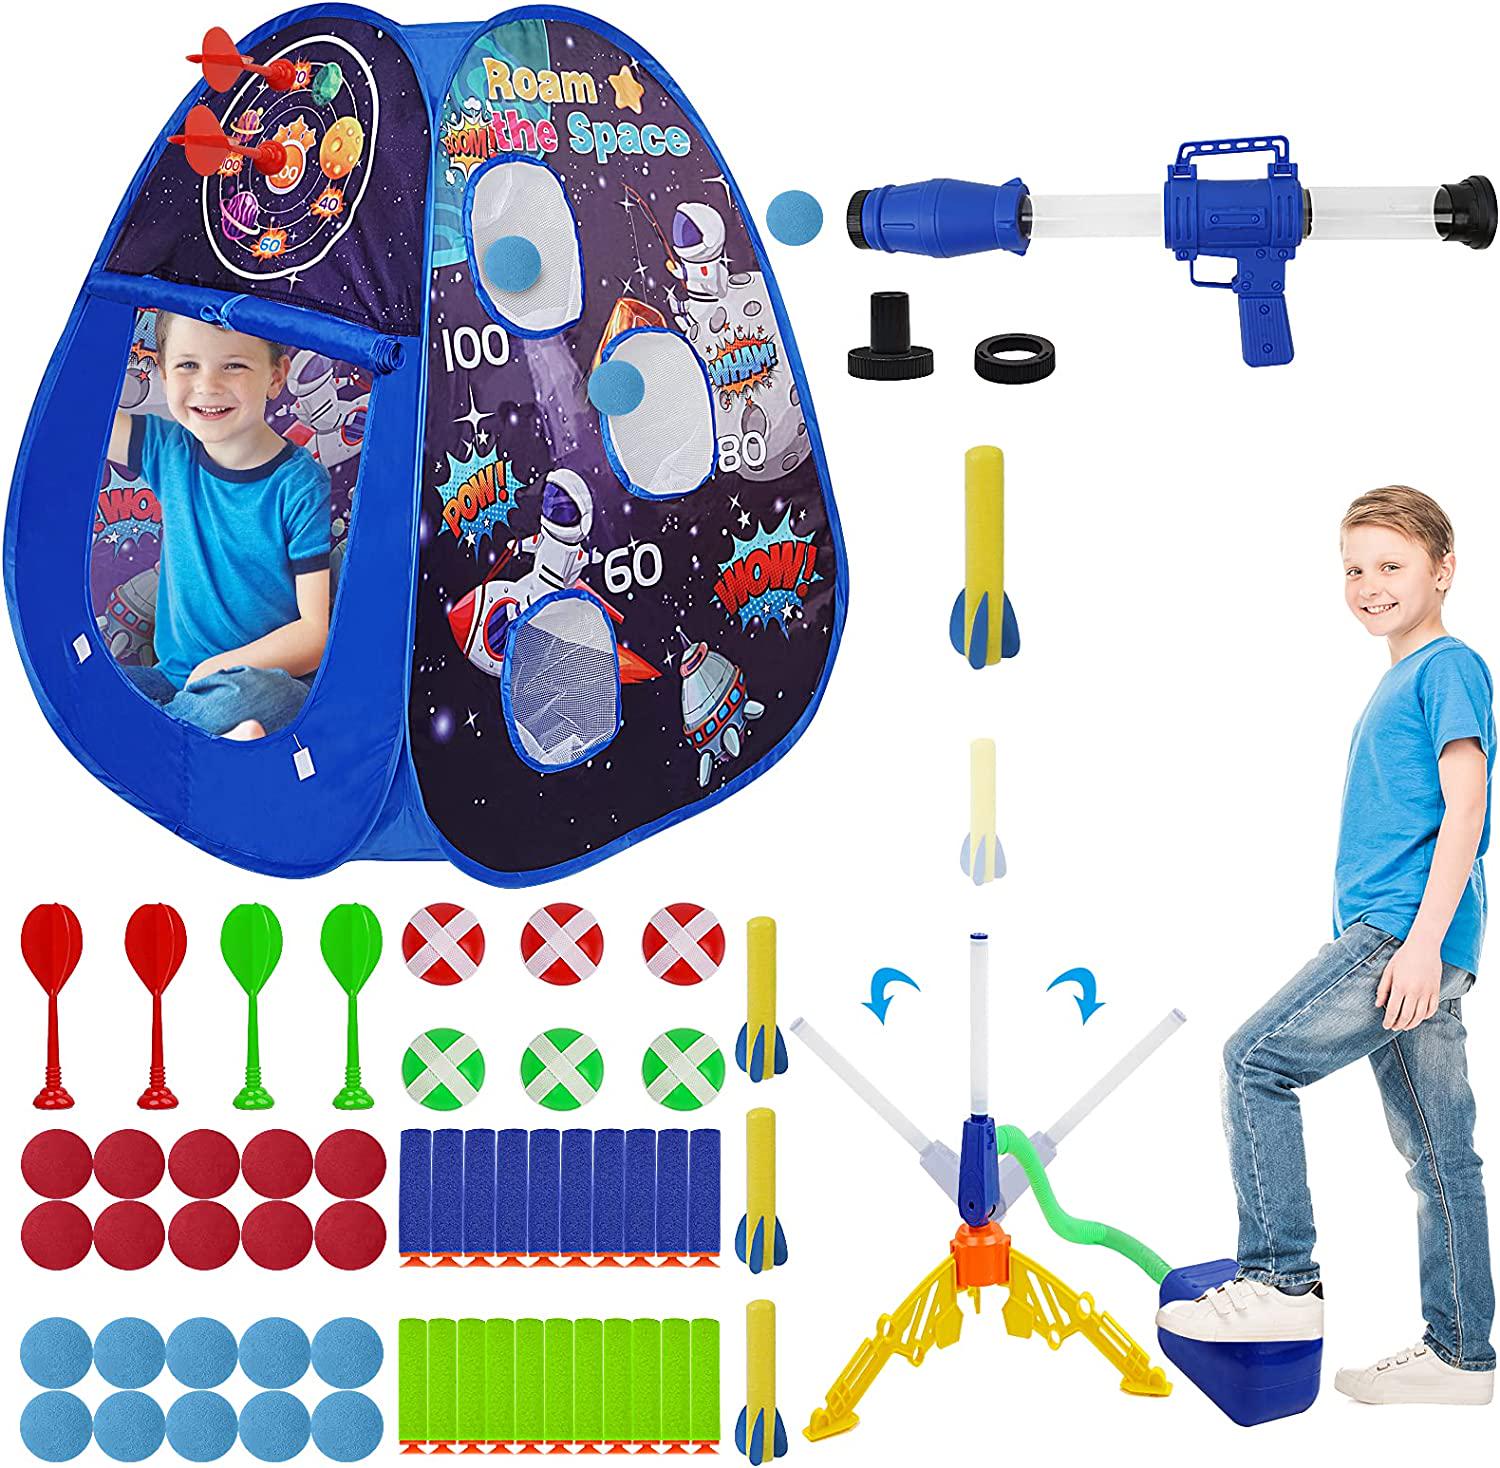 TANSAR, Kids Play Tent with Shooting Games and Rocket Launcher for Kids, Multi-Function Toy Set for 3 4 5 6 7 8+ Years Old Boys and Girls Indoor Outdoor Games for Kids (Space Blue)